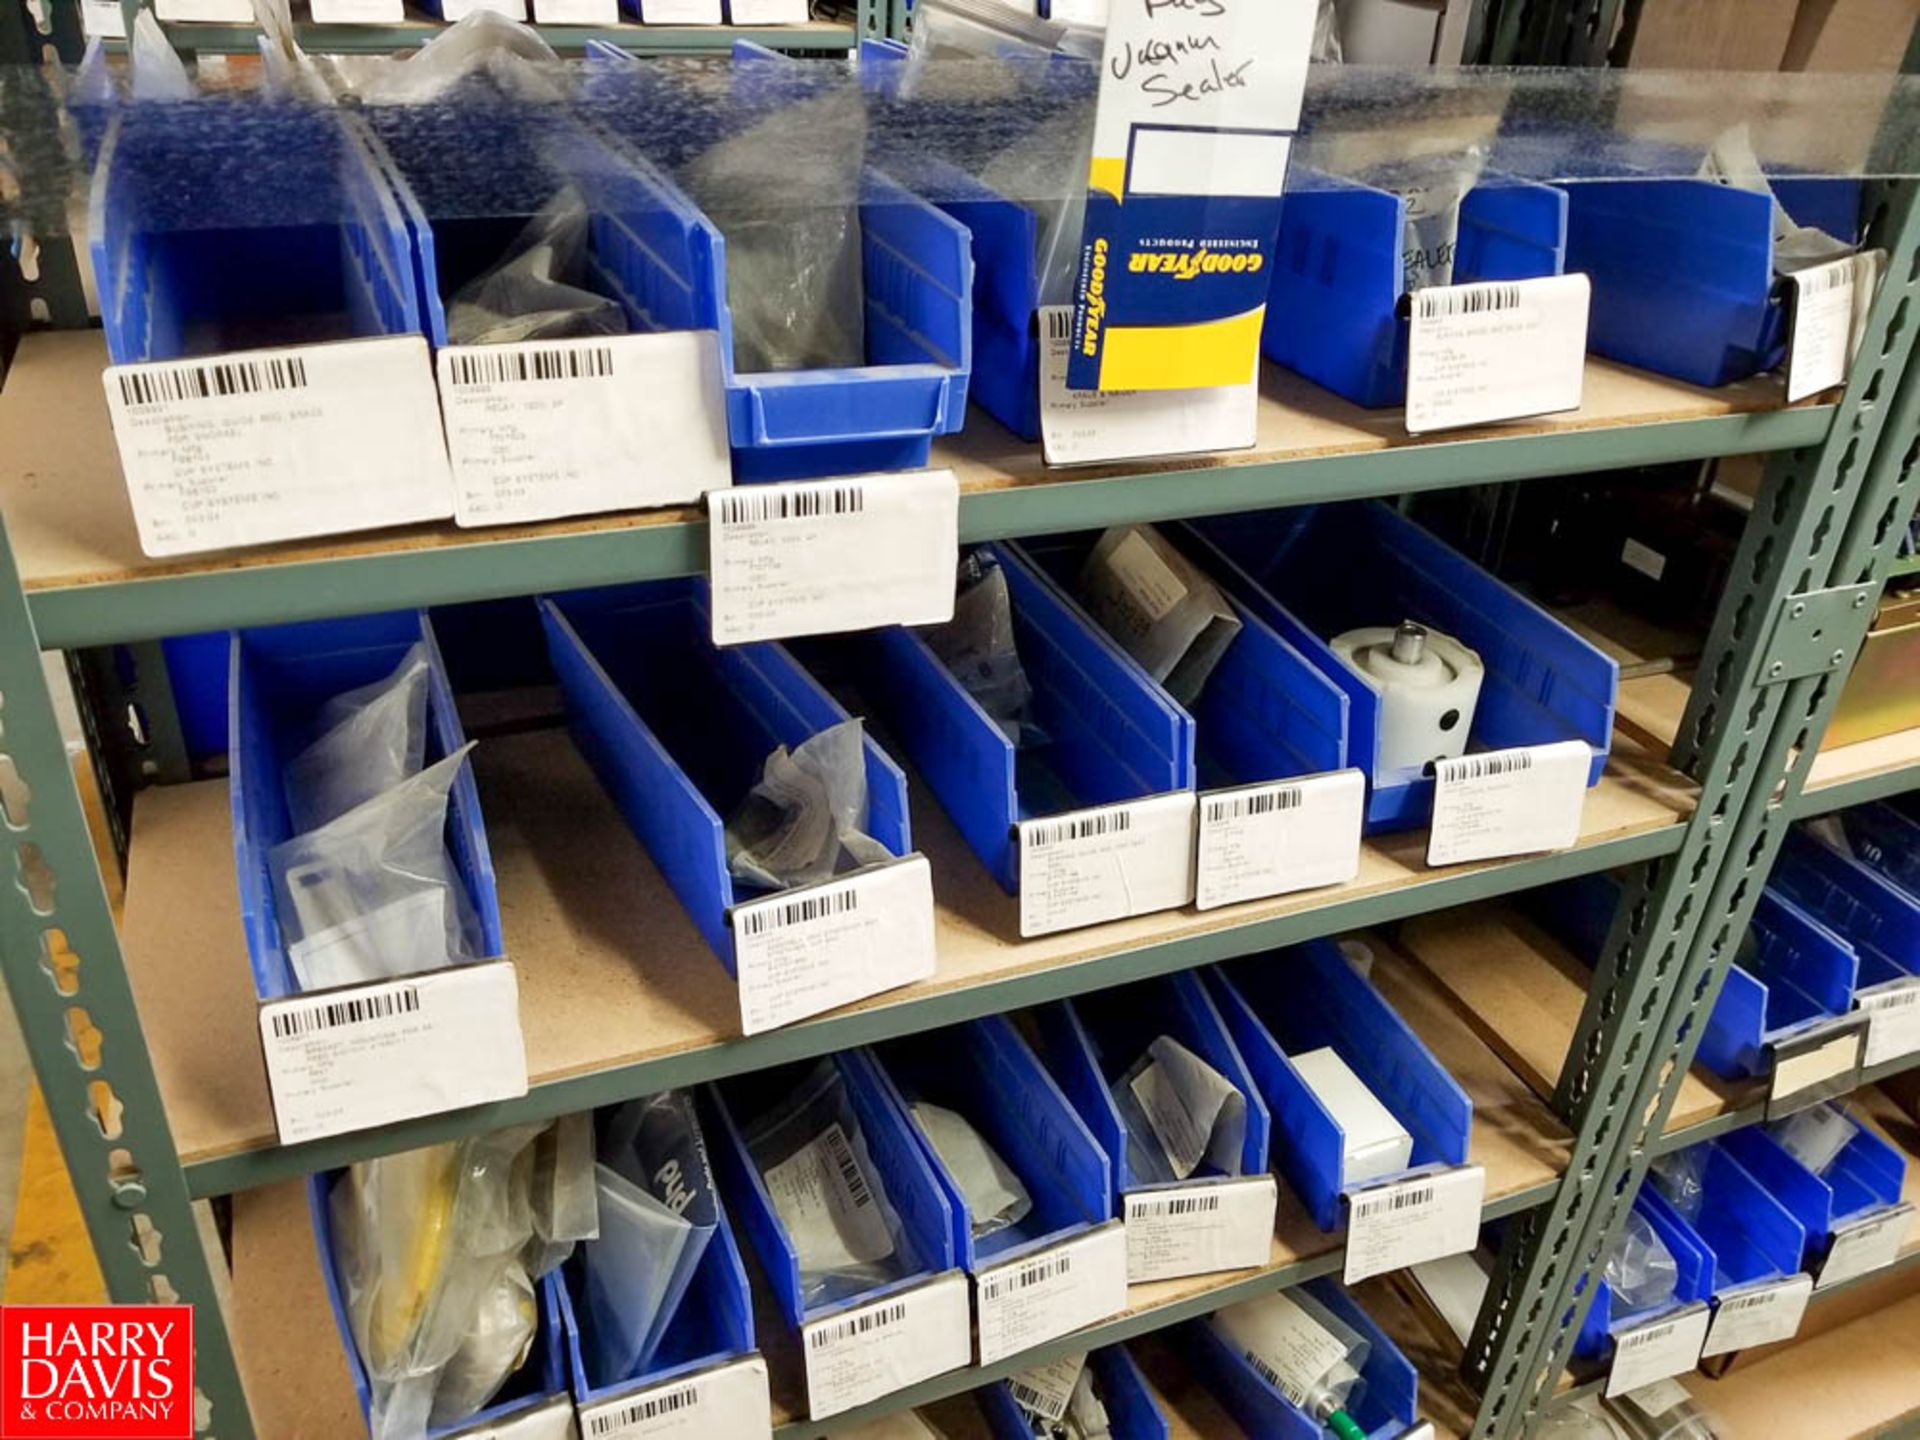 Sections of Adjustable Shelving Including Assorted Valve Kits Graco Parts Stem Valves Valve Balls - Image 12 of 19